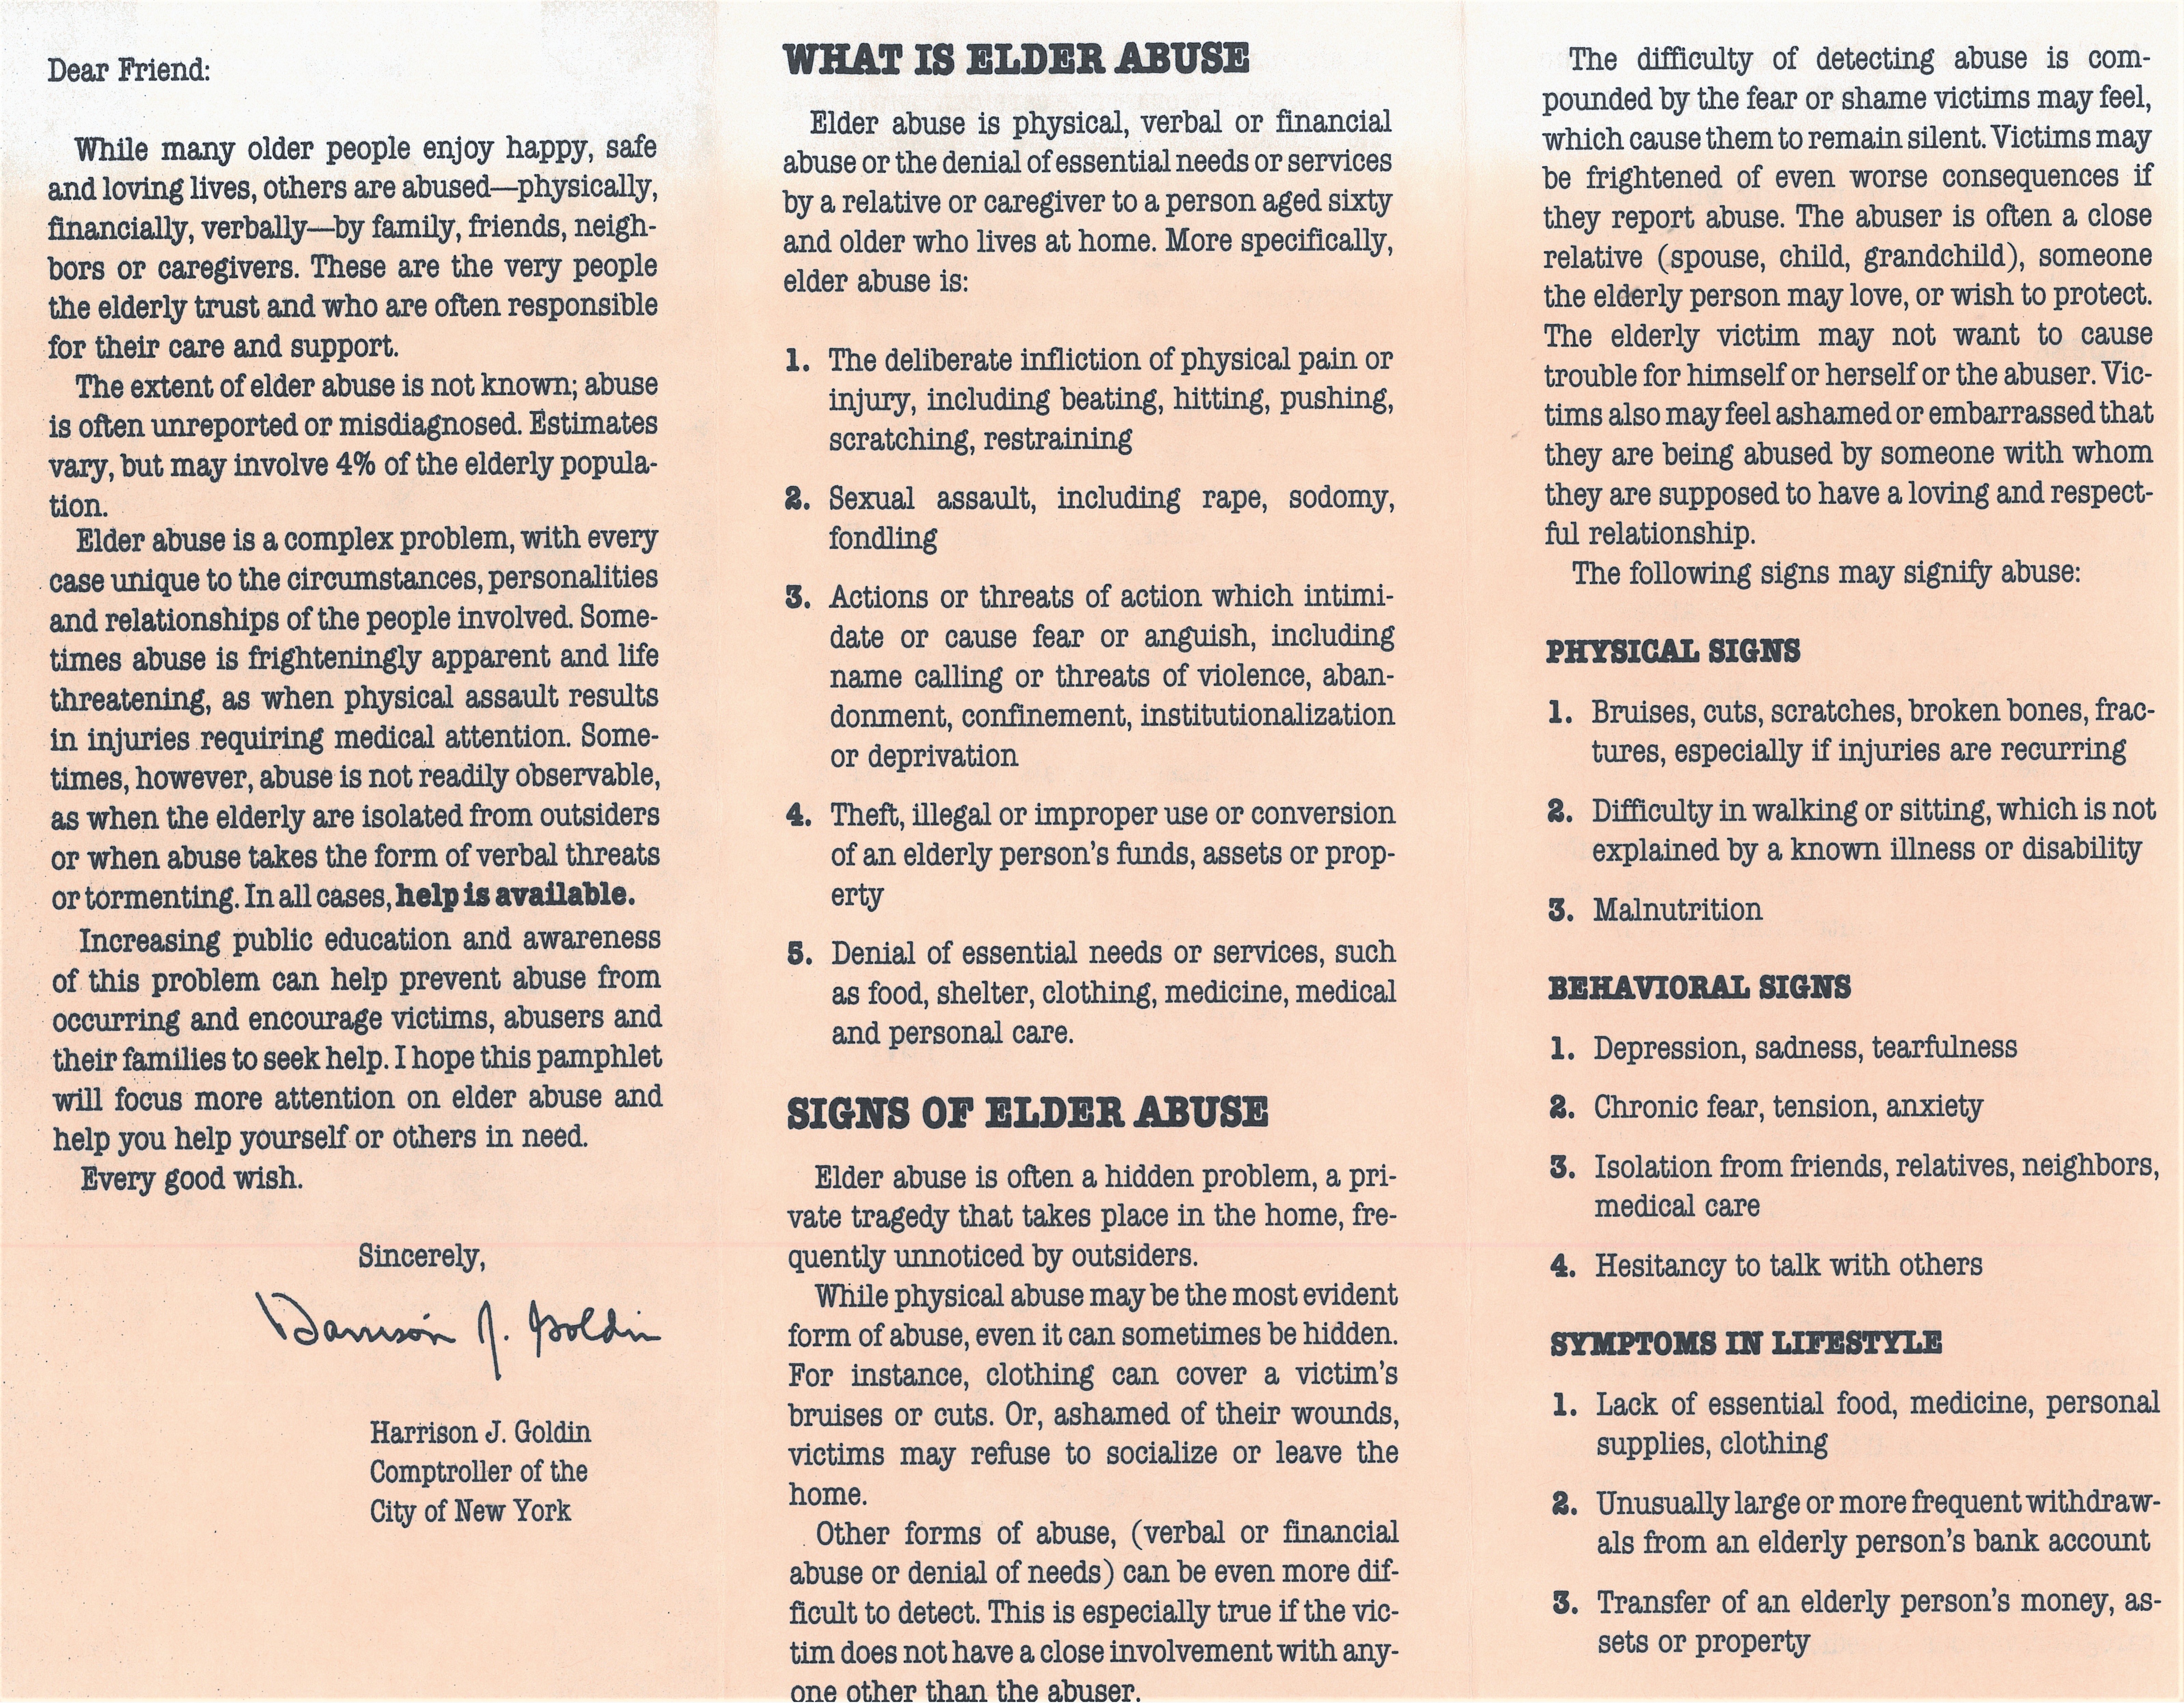 A pamphlet explaining elder abuse and the signs of the abuse.